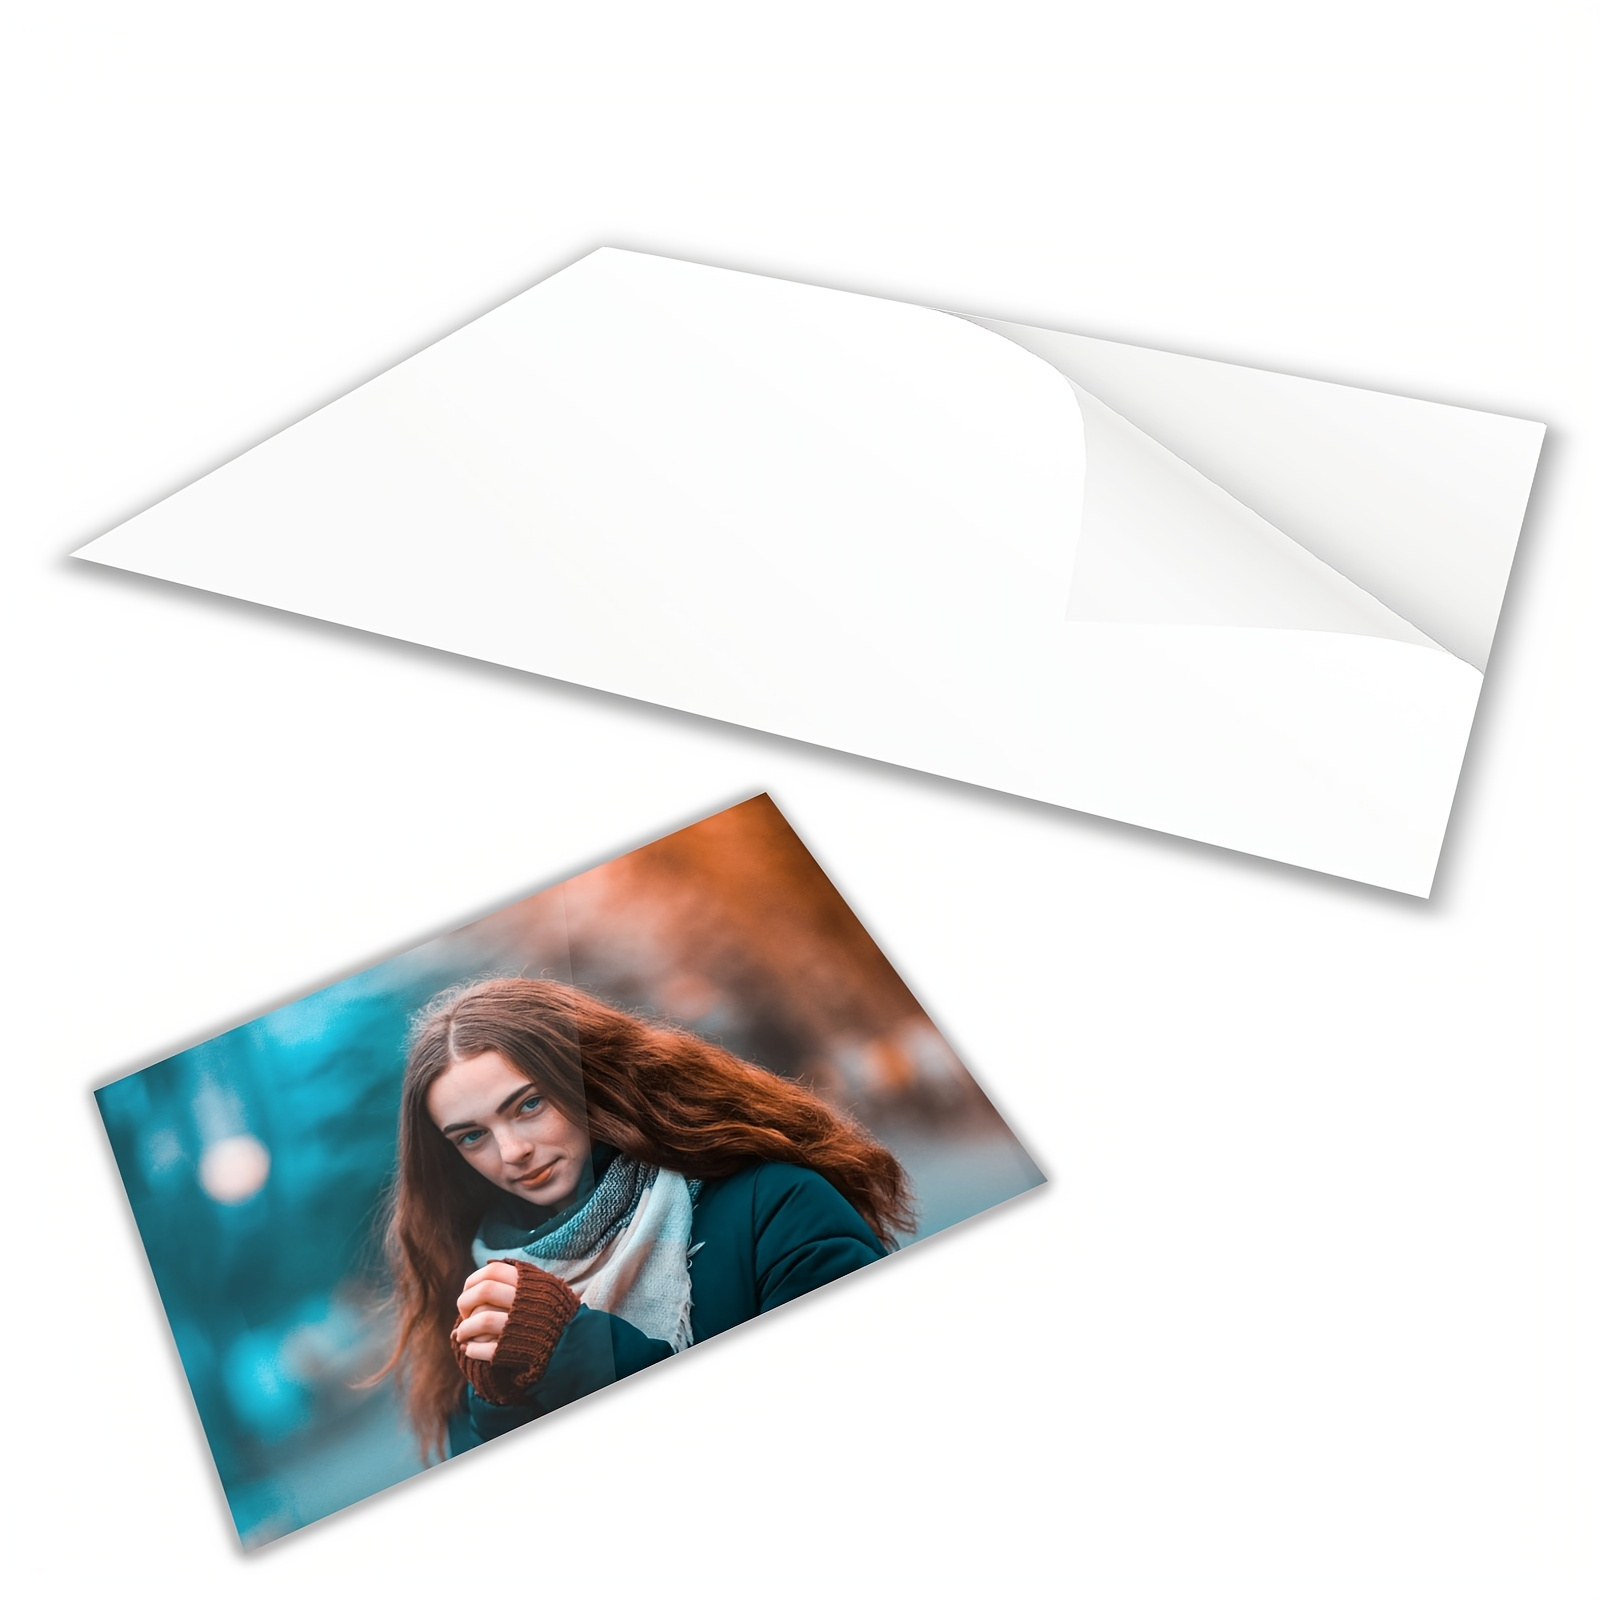 Cheap 66×105mm self adhesive laminating sheets Manufacturers and Suppliers